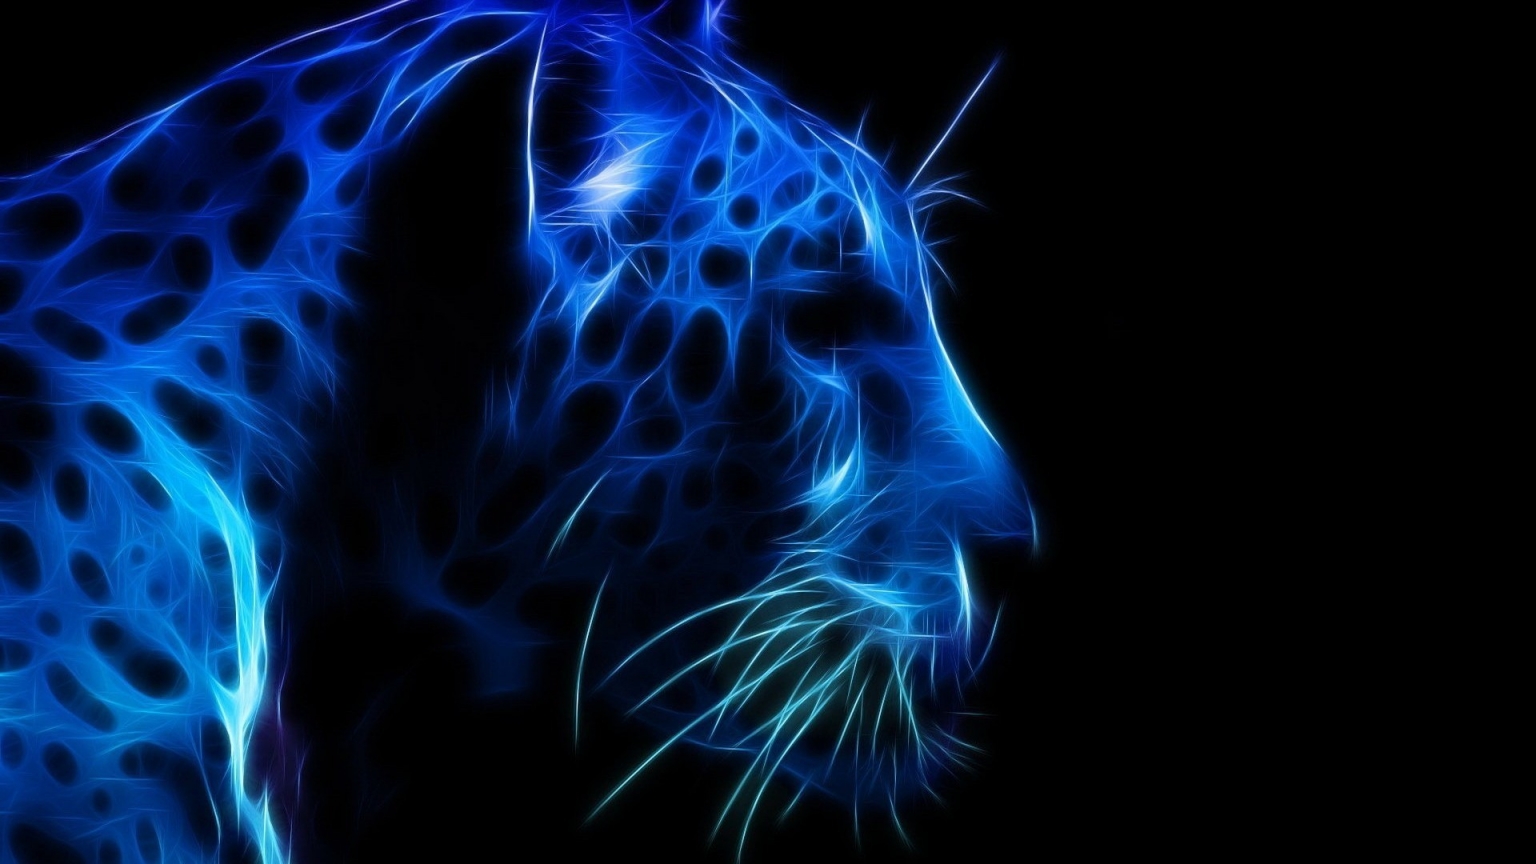 Leopard Profile Face for 1536 x 864 HDTV resolution